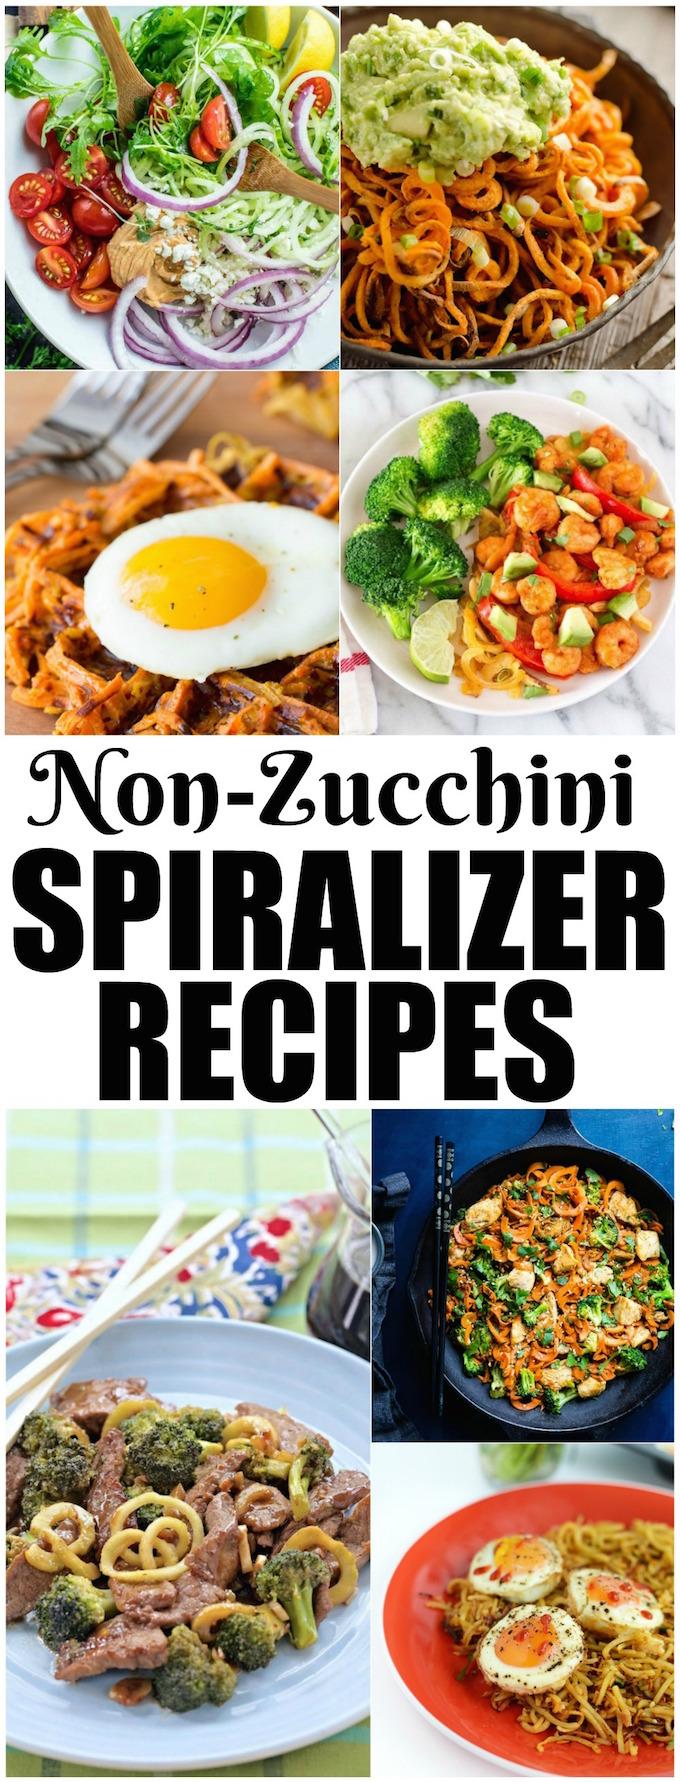 Use these Non-Zucchini Spiralizer Recipes to expand your love for your spiralizer. Everything from carrots to sweet potatoes to broccoli stems can be spiralized and added to healthy meals!